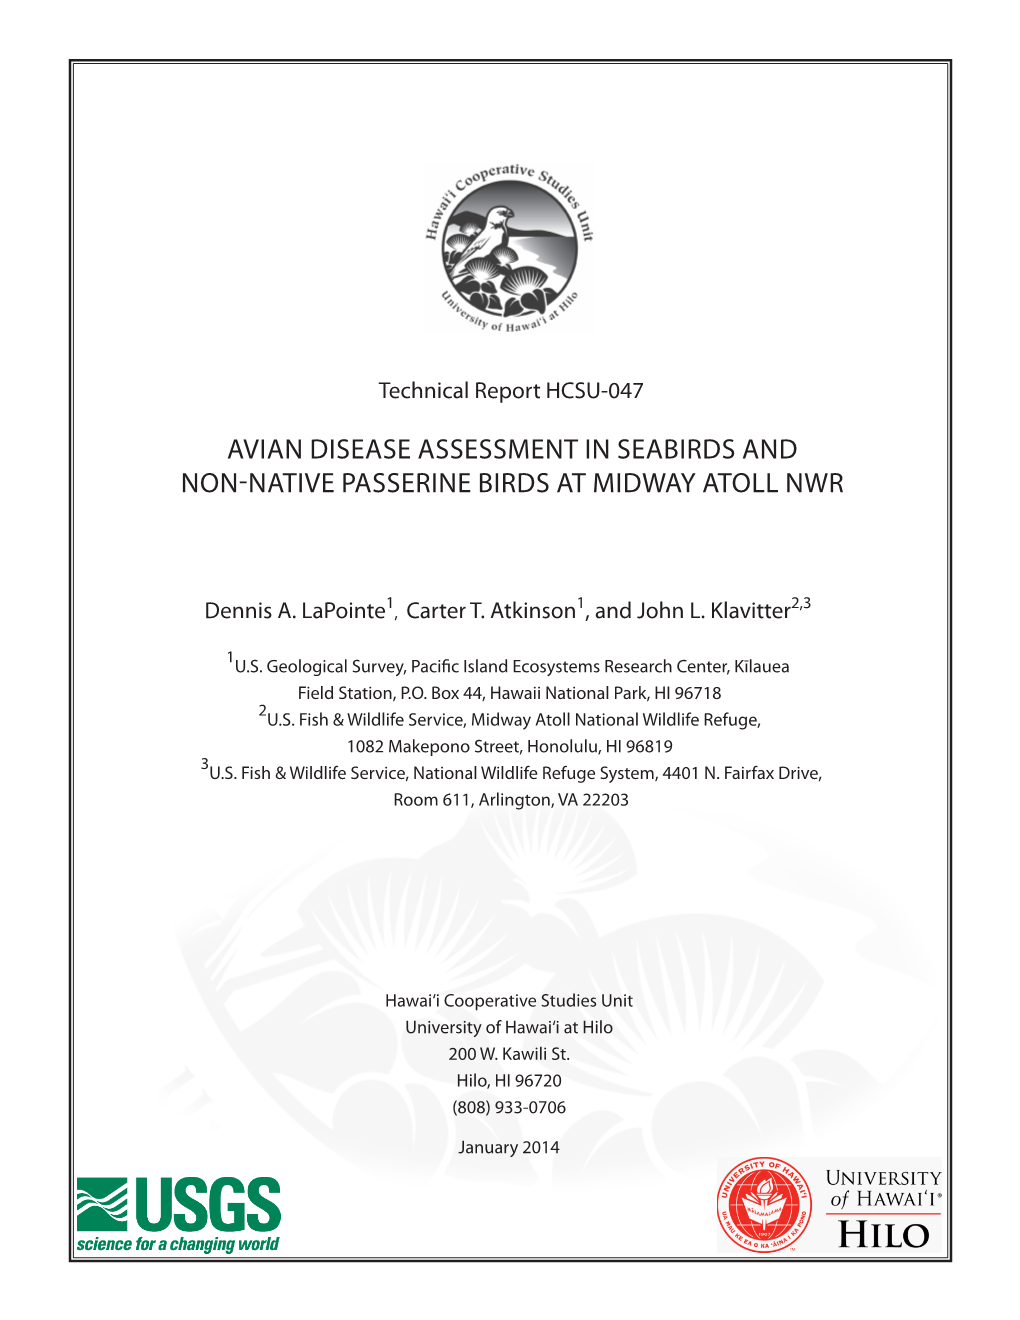 Avian Disease Assessment in Seabirds and Non-Native Passerine Birds at Midway Atoll NWR